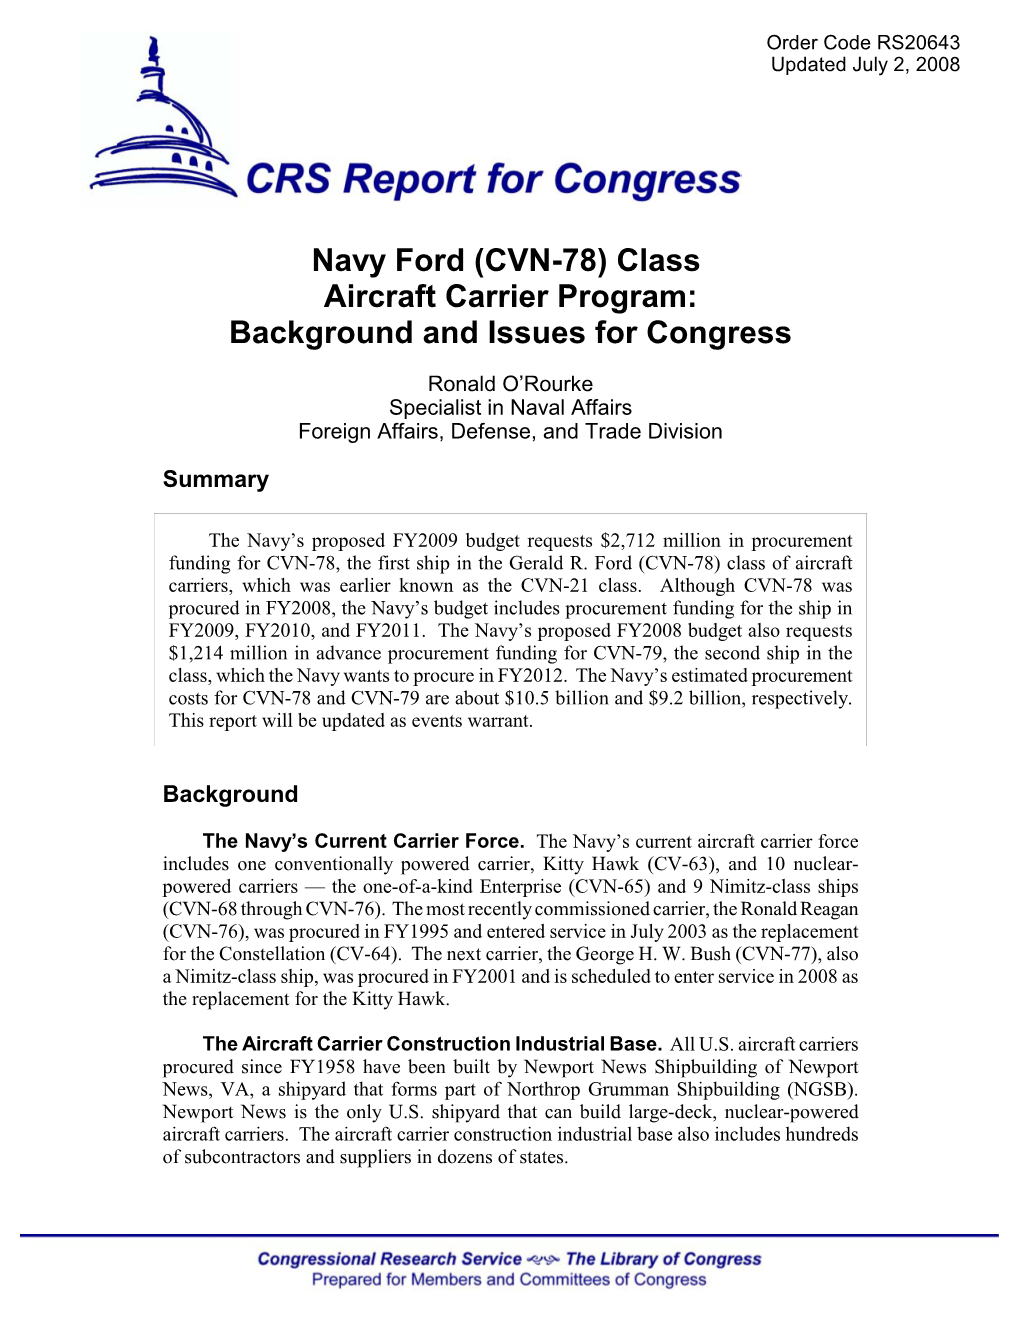 Aircraft Carrier Program: Background and Issues for Congress